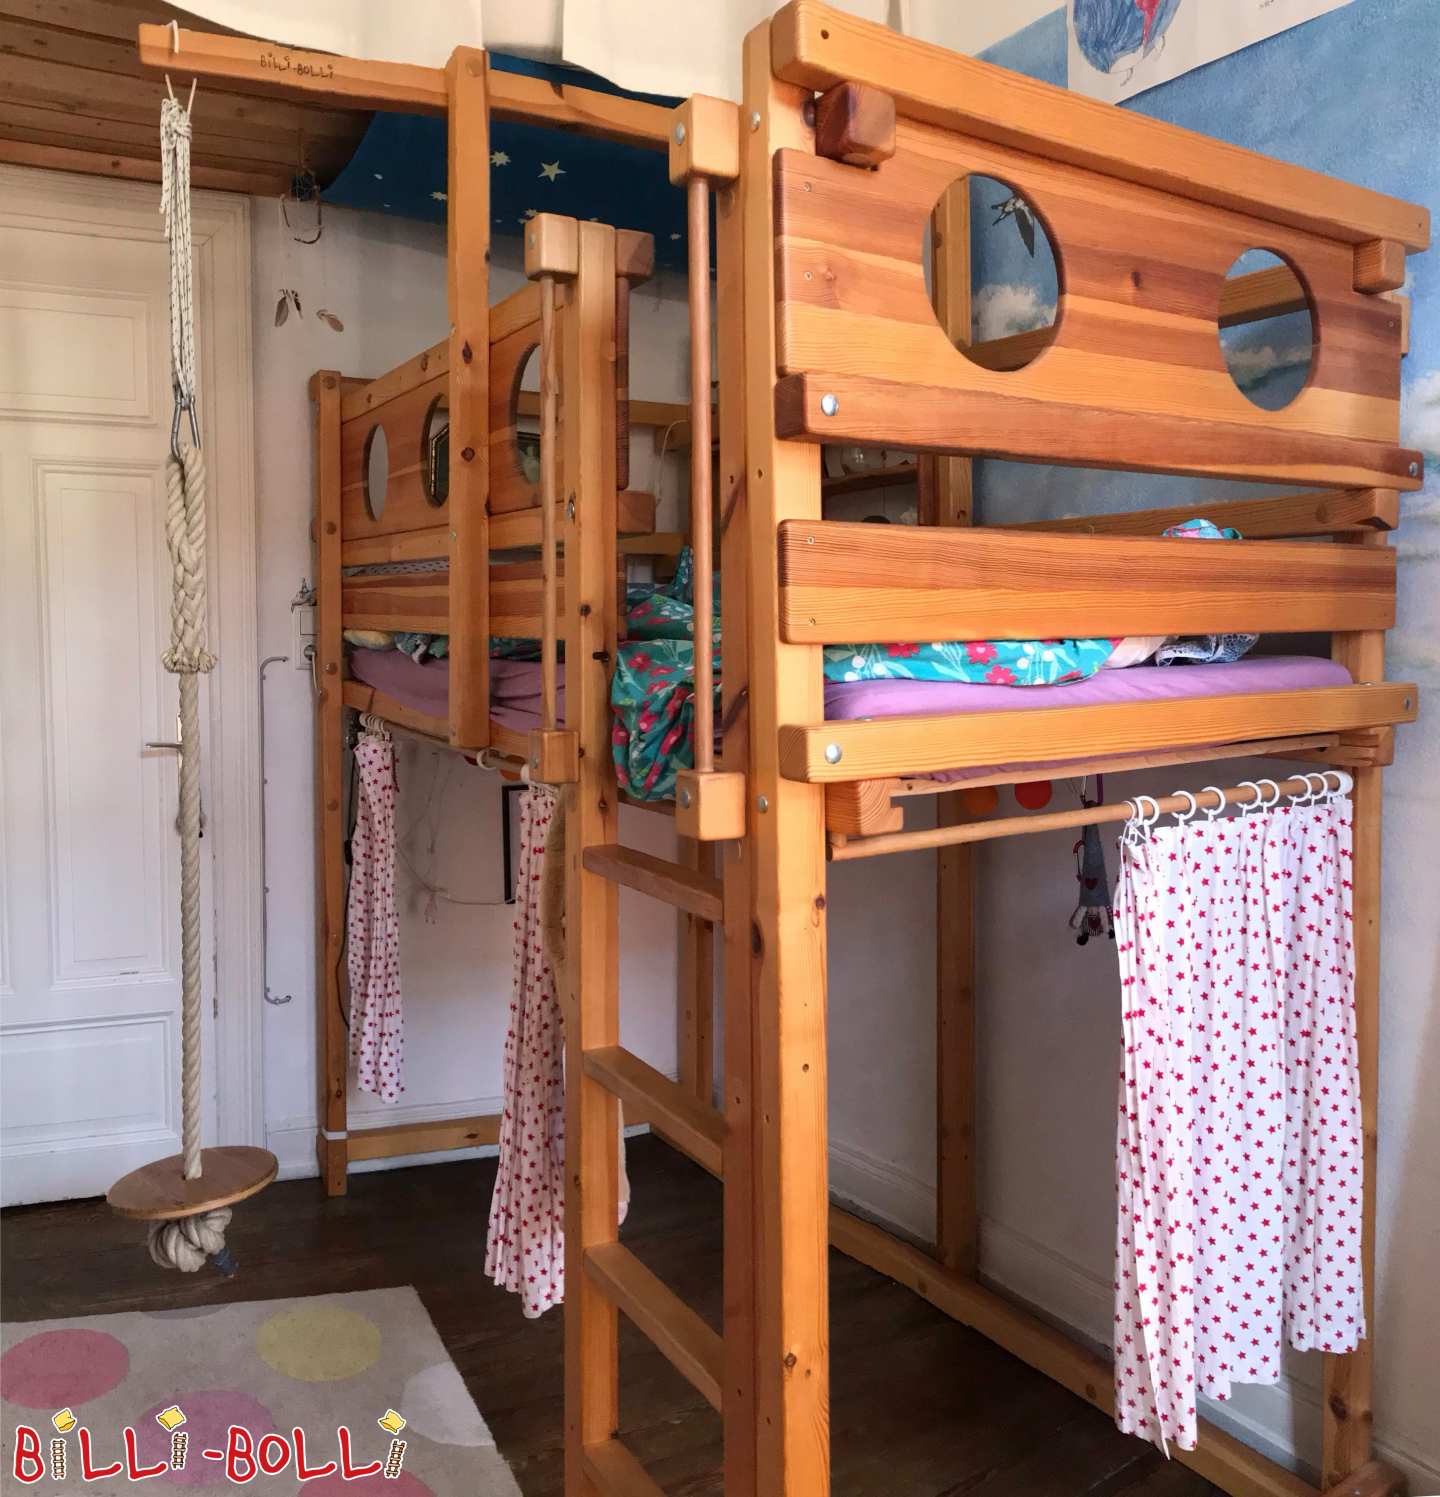 Pirate loft bed made of oiled pine (Category: second hand loft bed)